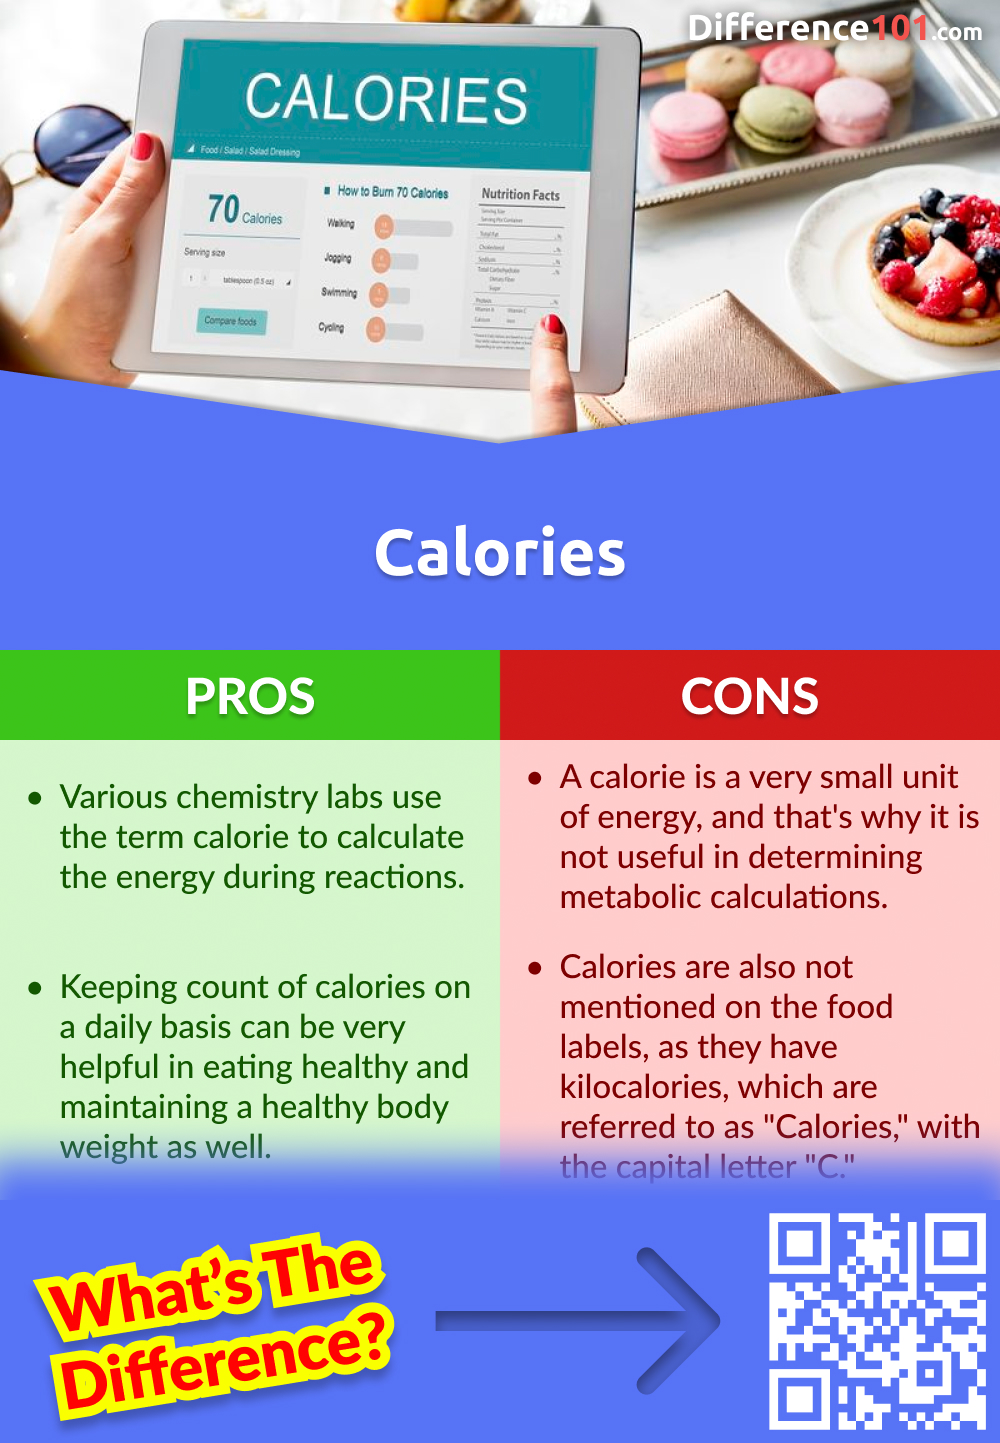 Calories Pros and Cons